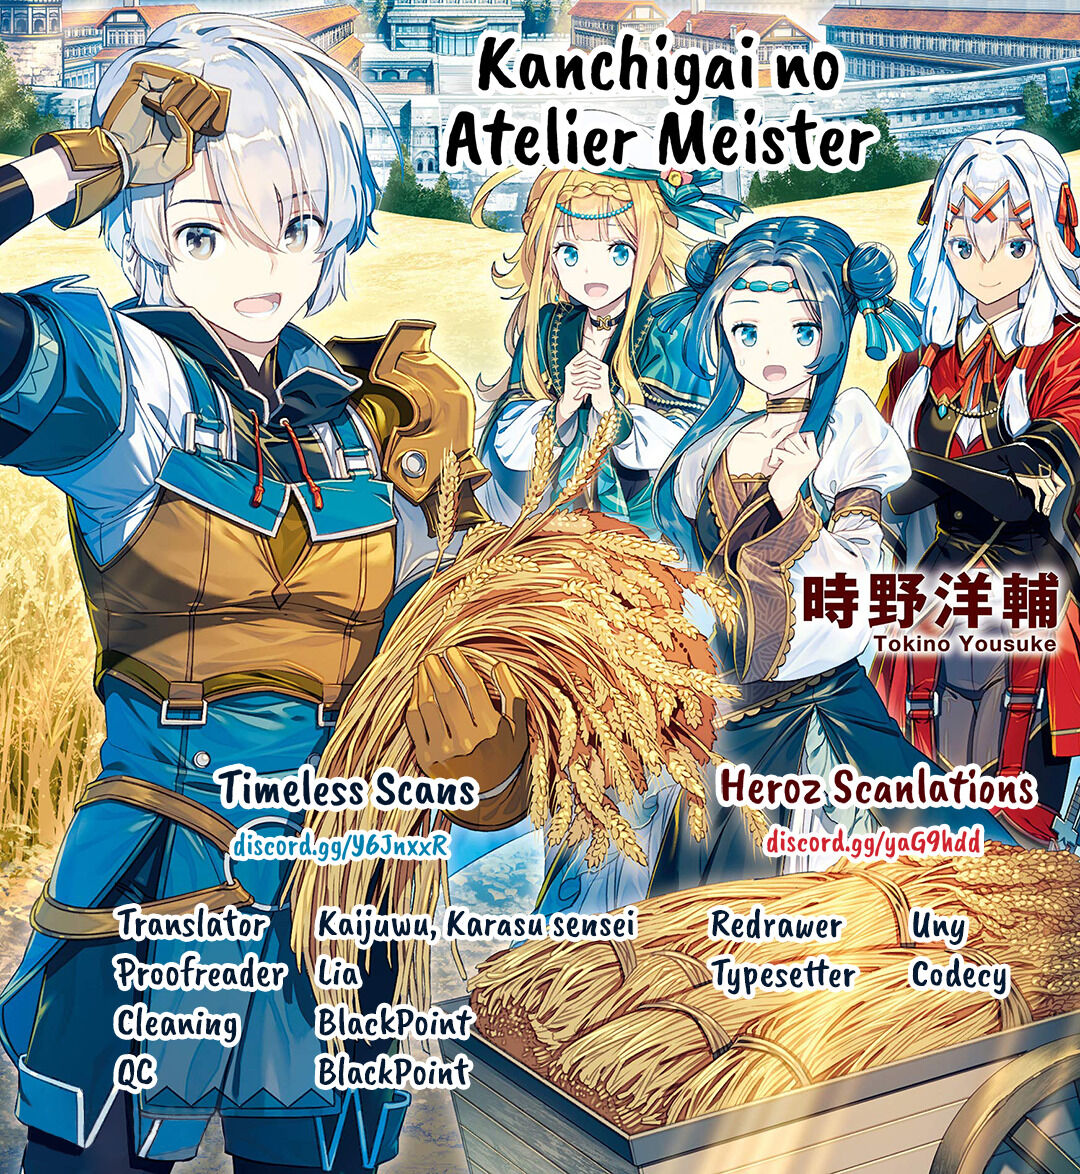 Kanchigai no Atelier Master - Chapter 7470 - The thing that lurks in the dark - Image 1